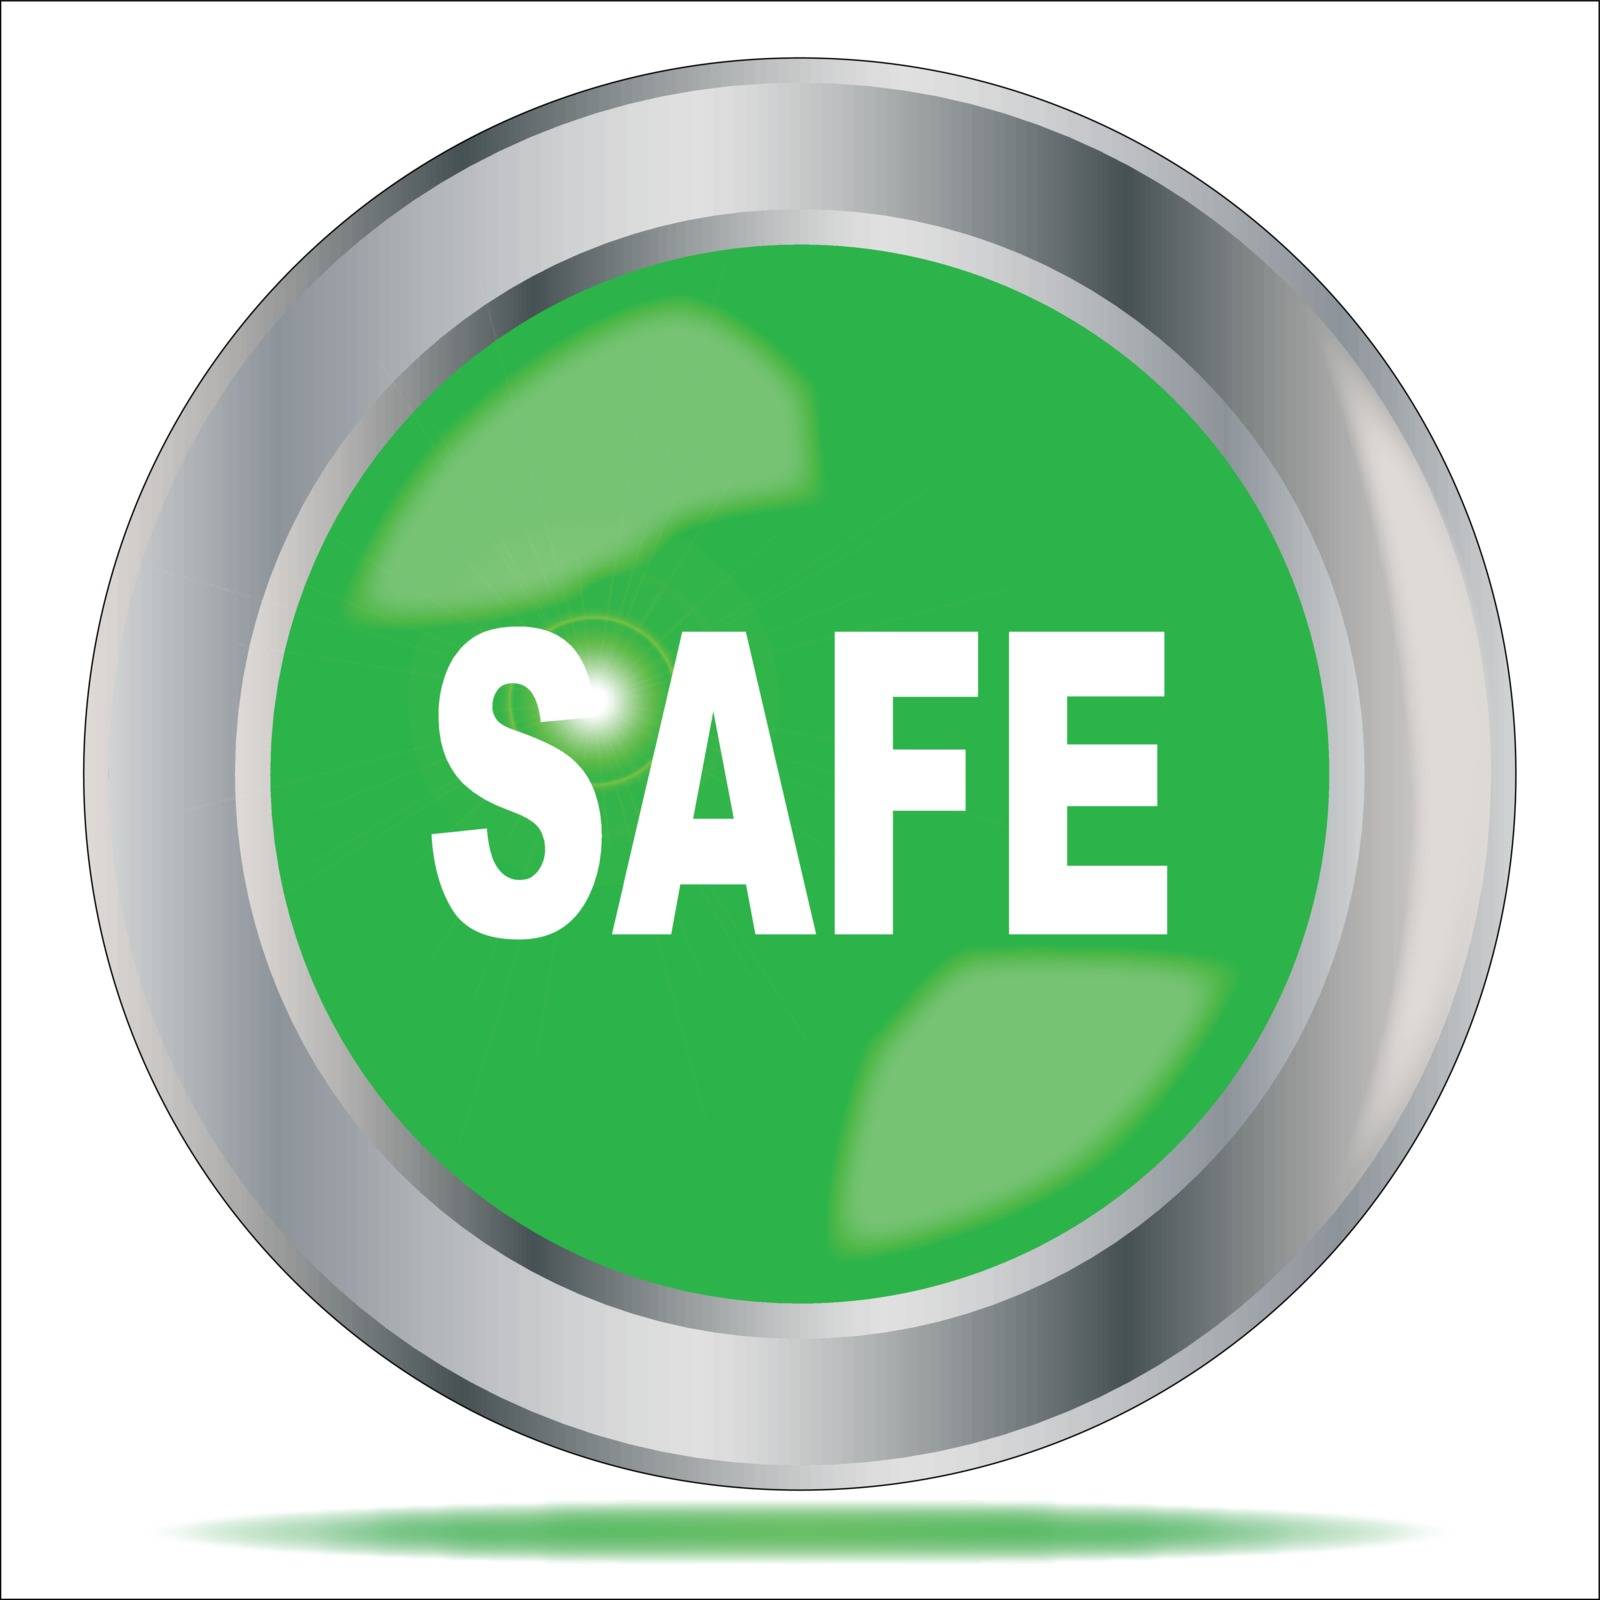 A large green safe button over a white background